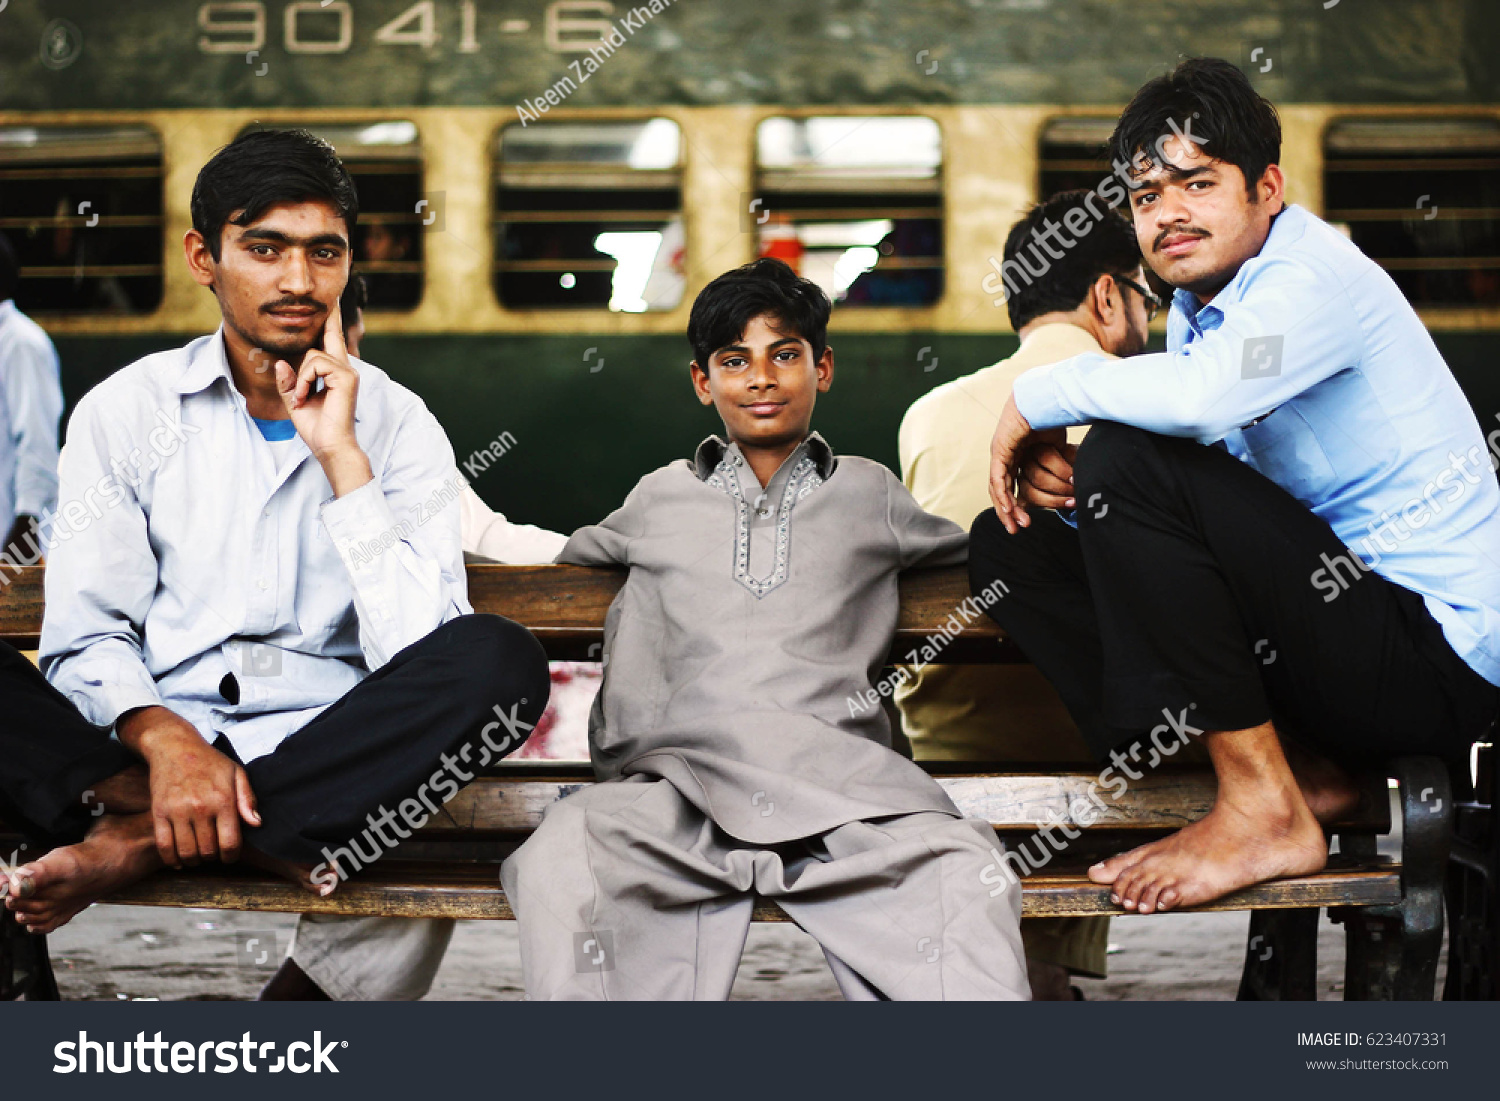 stock-photo-passengers-sitting-on-a-bench-and-waiting-for-their-train-at-karachi-cantt-station-623407331.jpg